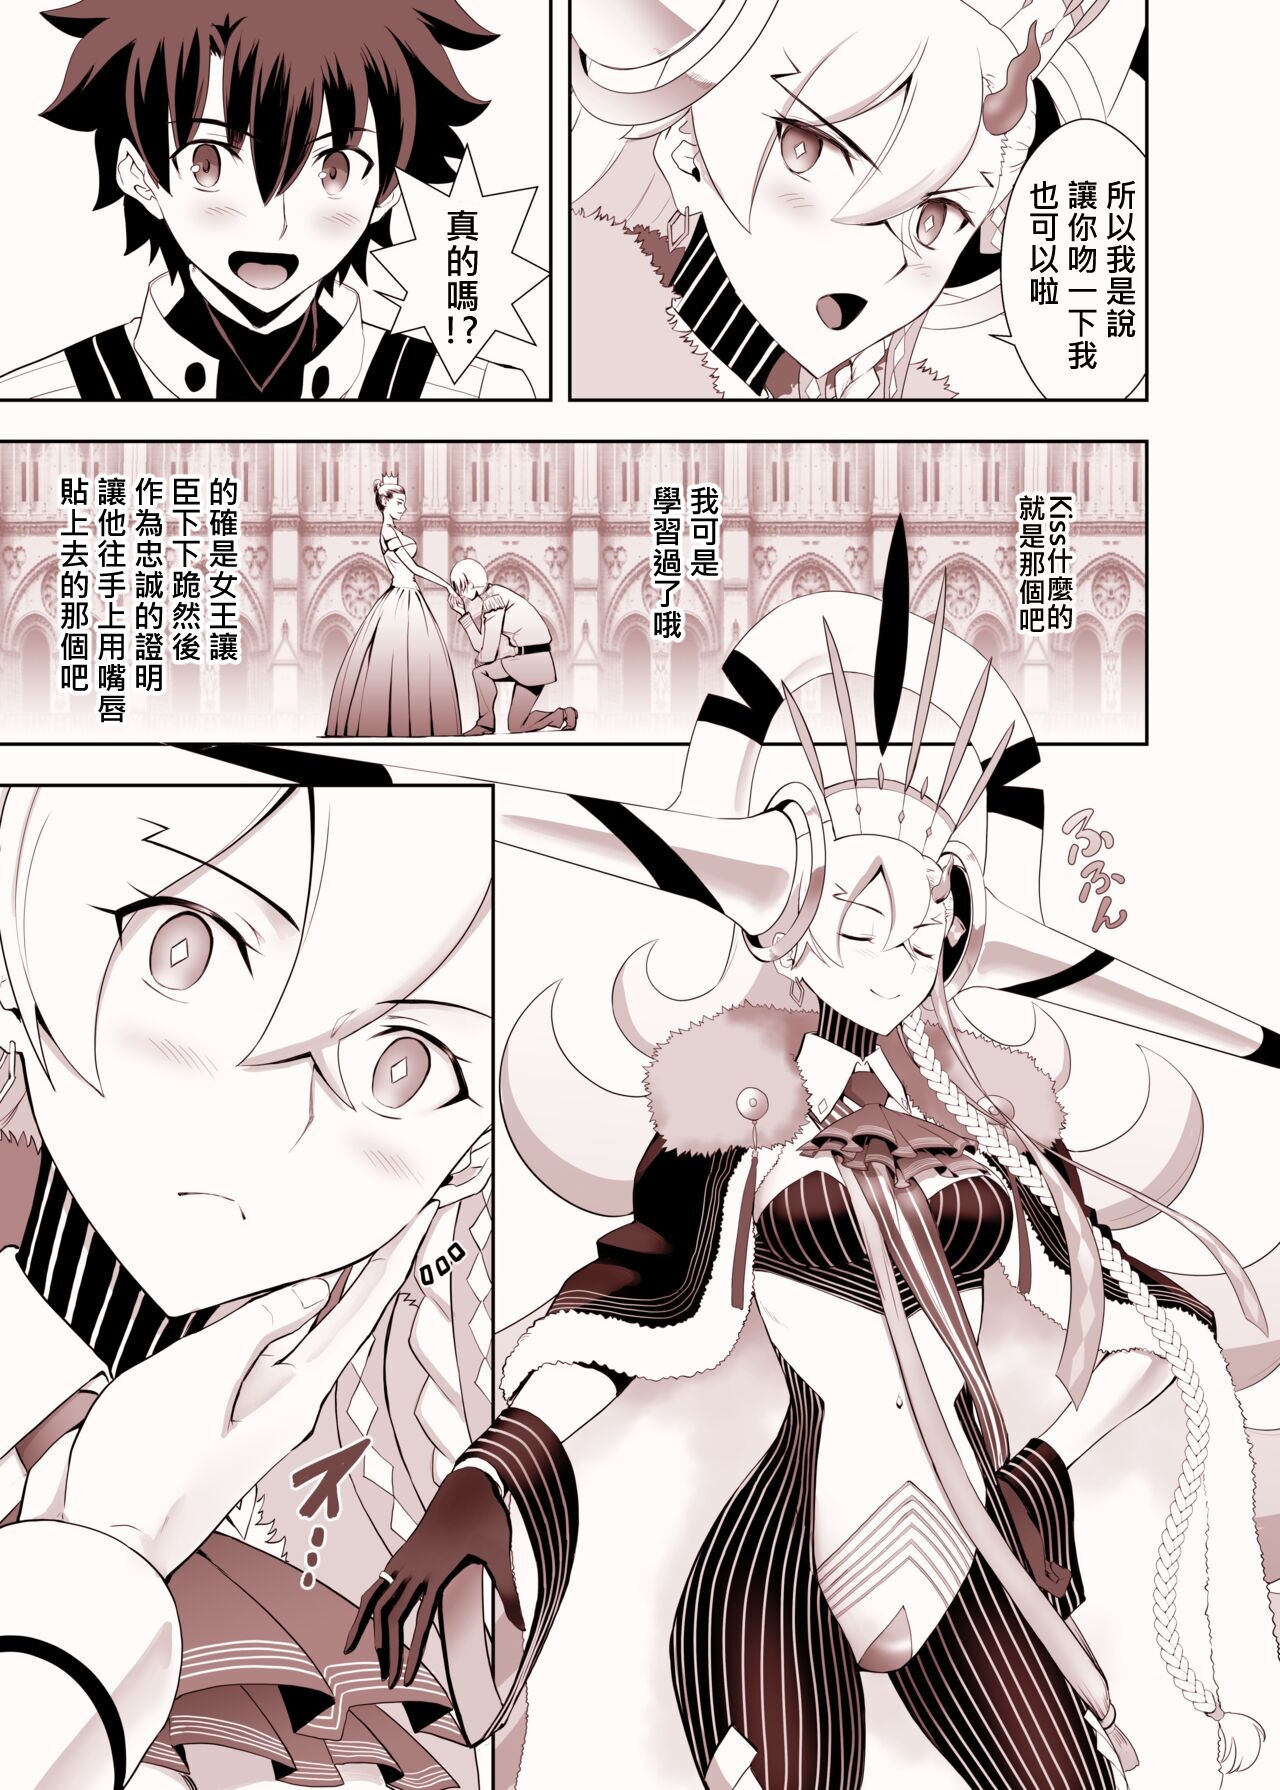 [CRAZY CLOVER CLUB] Lovely U (Advance Release) (Fate/Grand Order) [Chinese] [Digital] 3